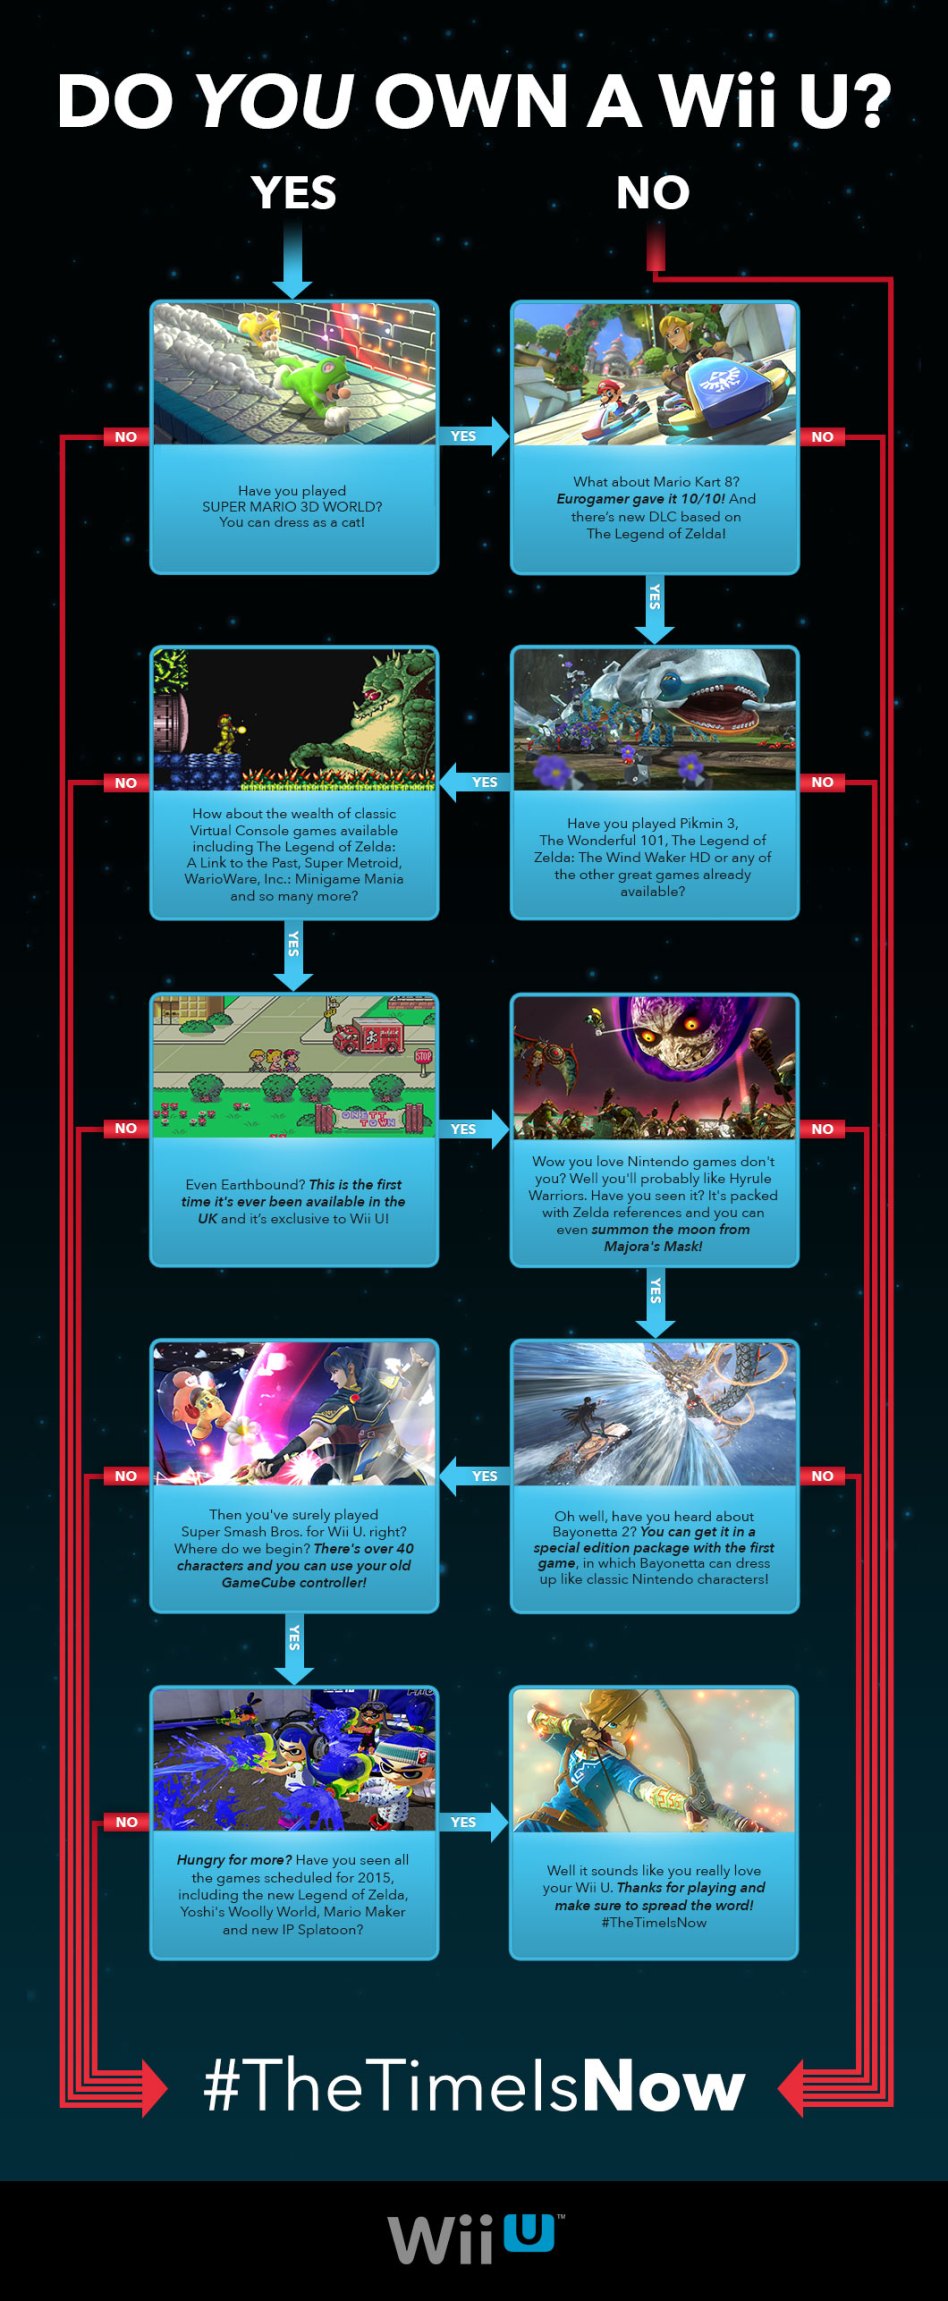 wii_u_time_is_now_infographic.jpg?w=948&